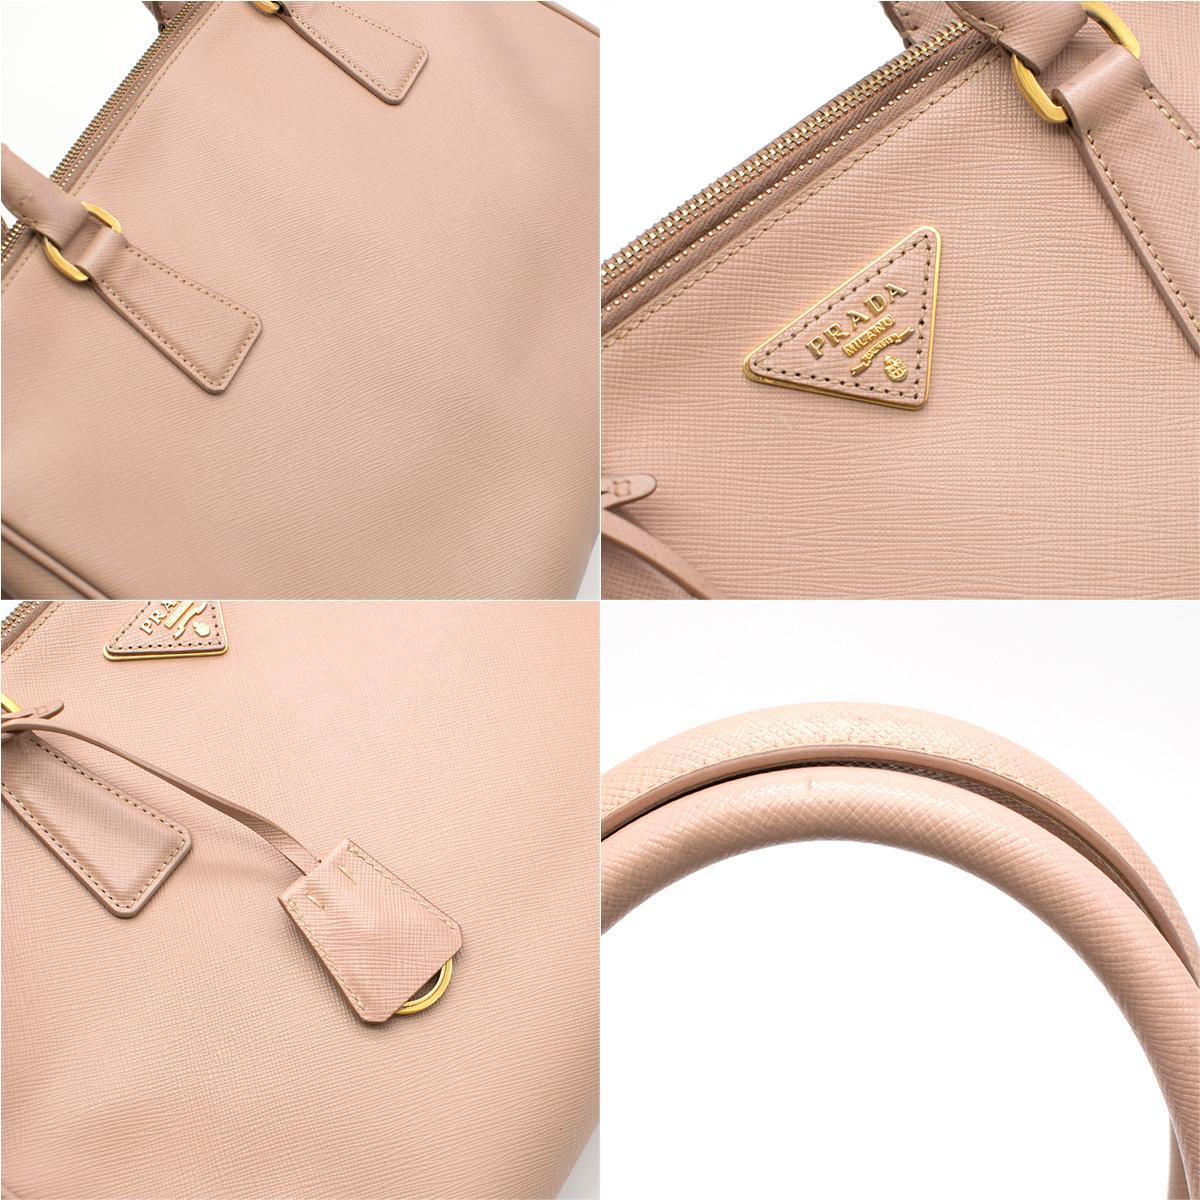  Prada Nude Galleria Large Saffiano Leather Bag In Excellent Condition In London, GB